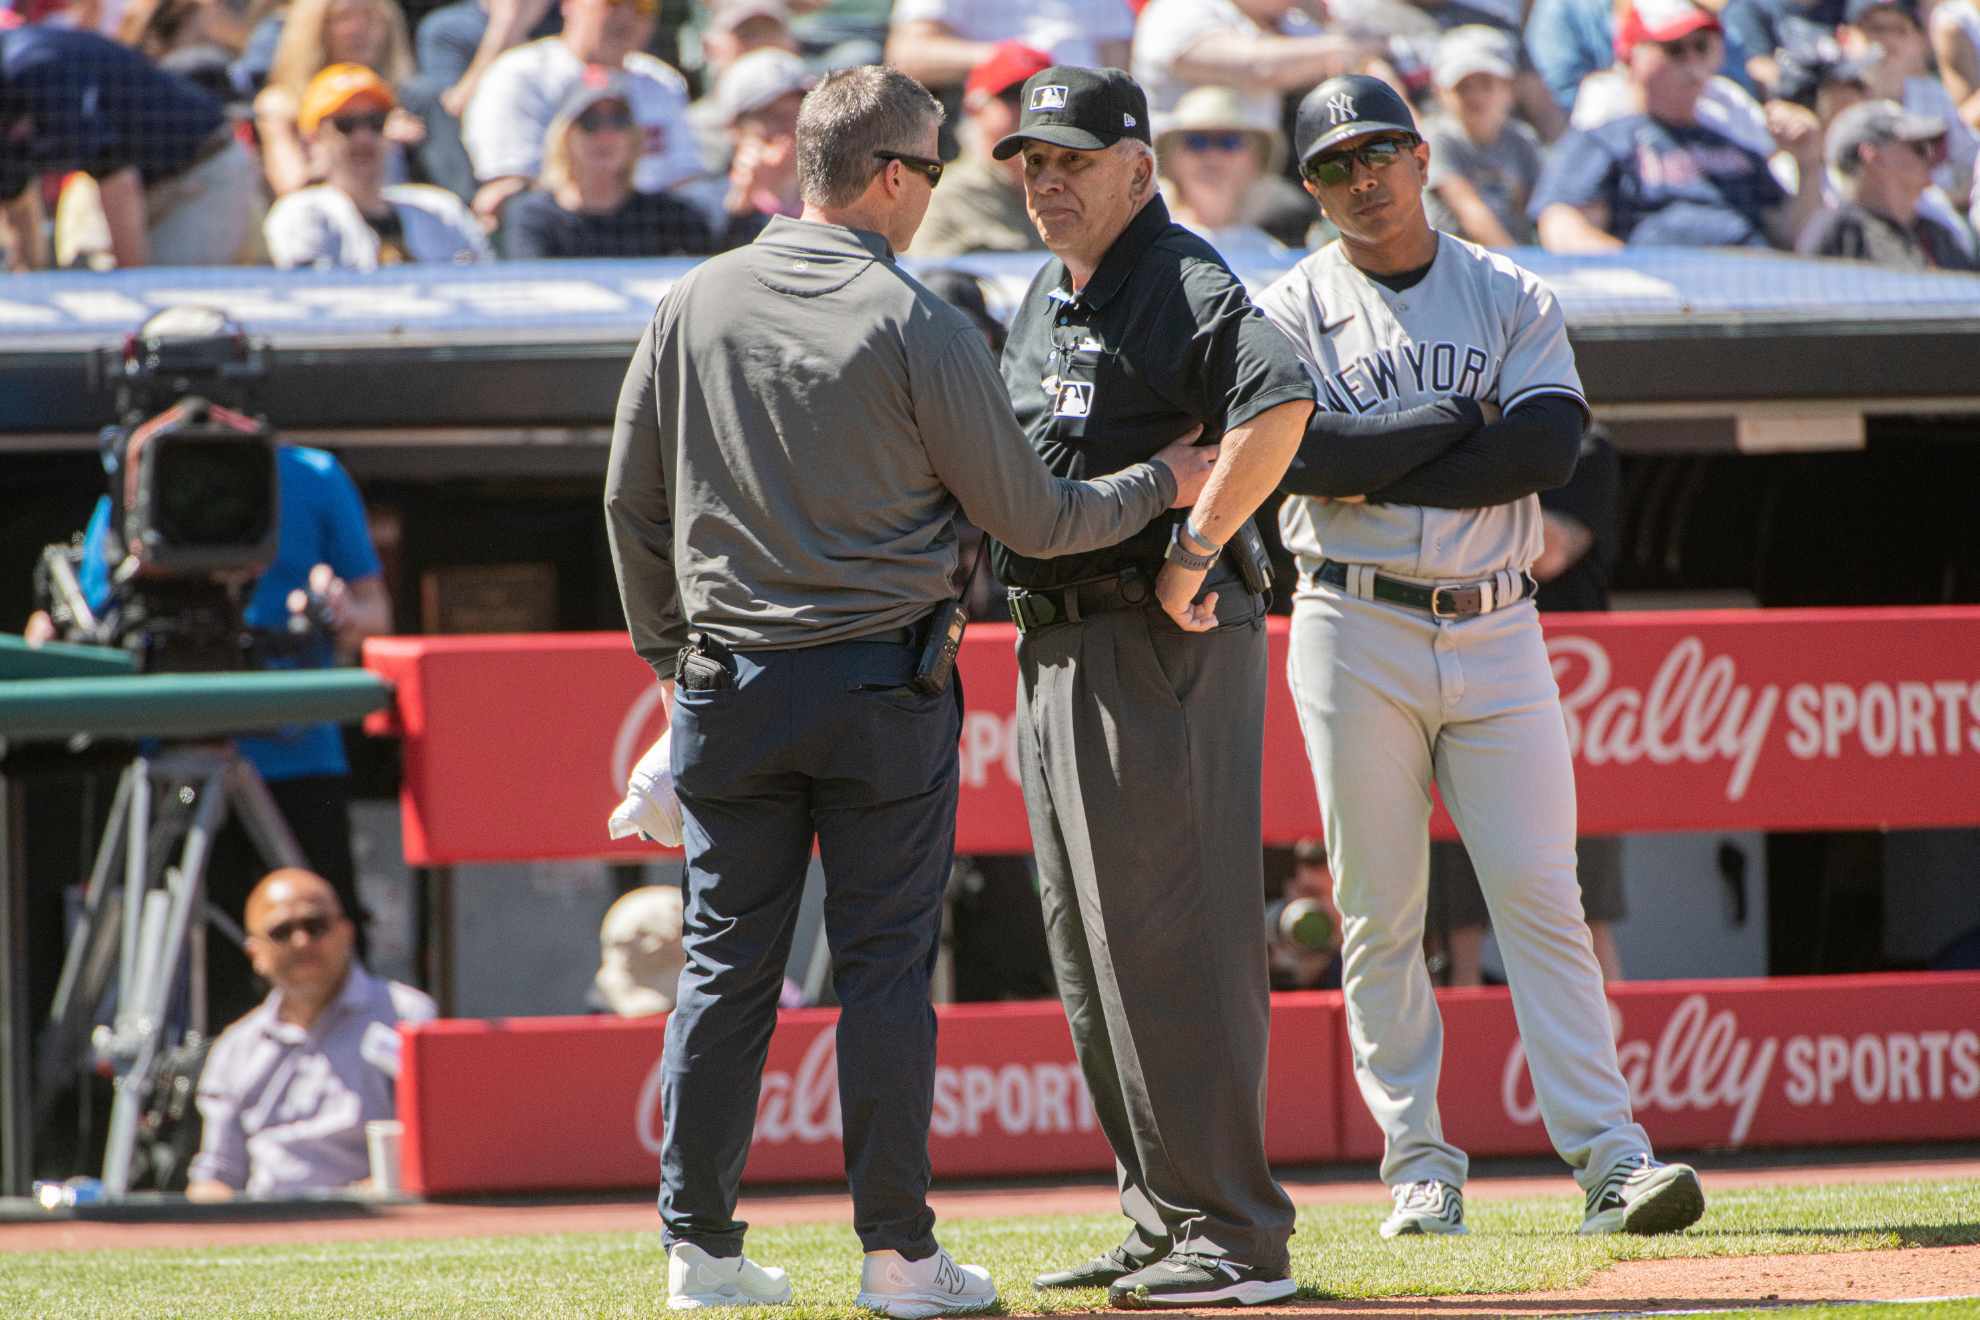 Vanover, who had ejected Yankees manager Aaron Boone in the first inning following a controversial play, was knocked off his feet by the throw.